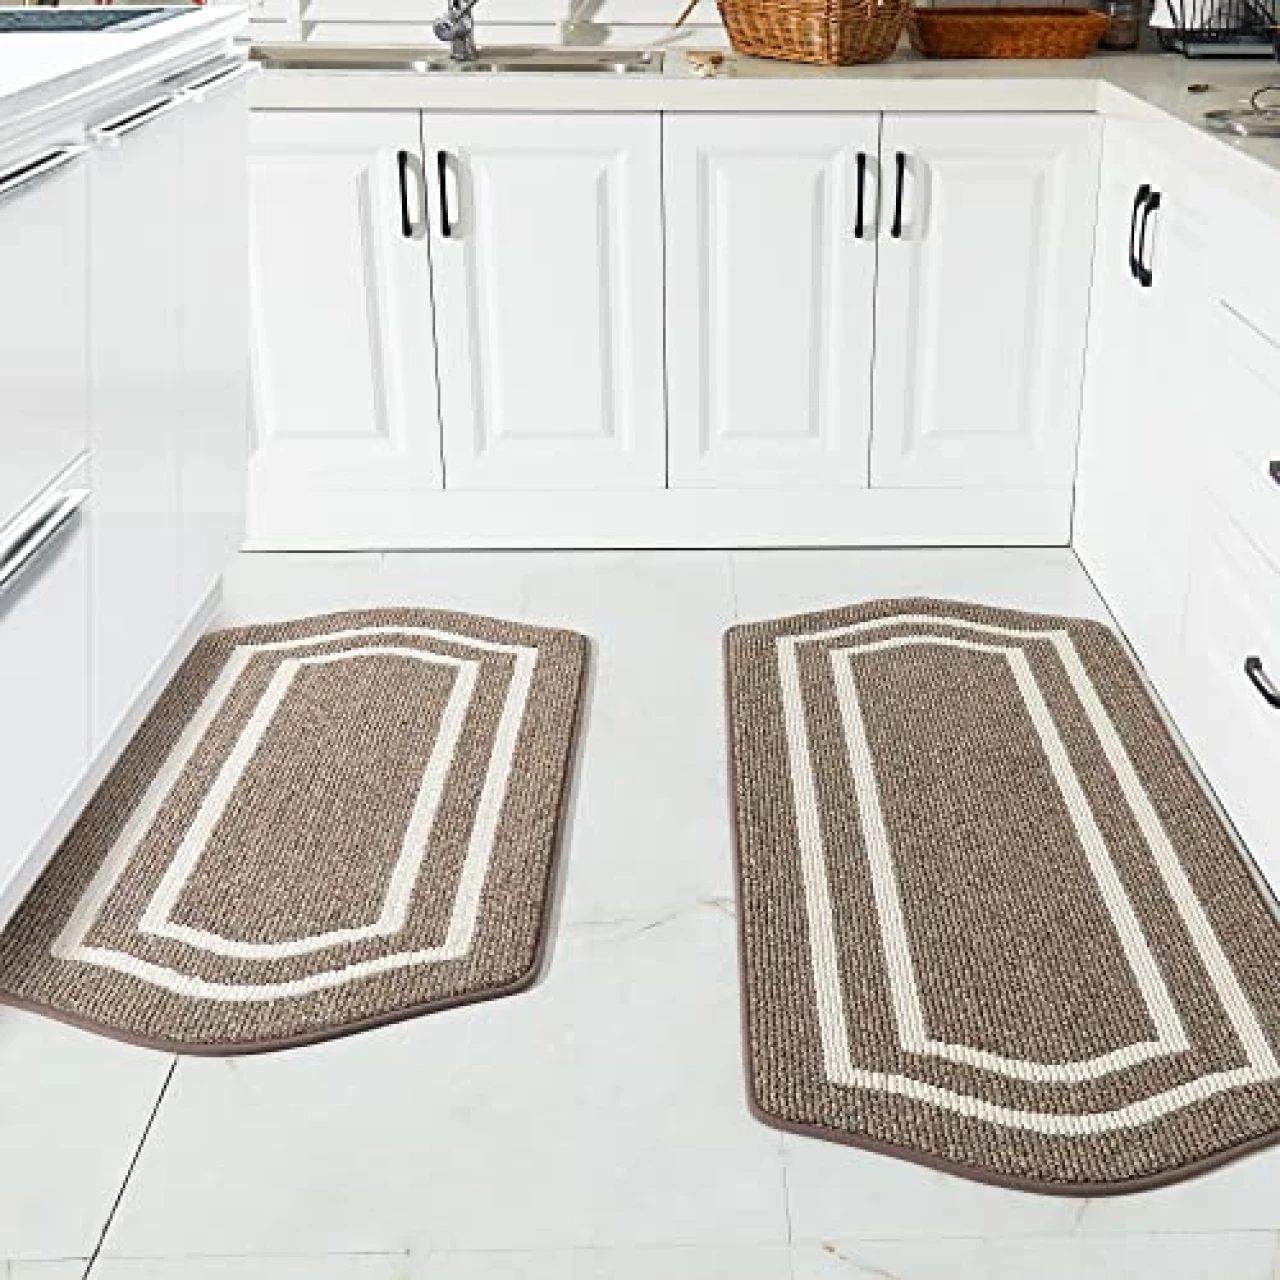 COSY HOMEER Long Kitchen Floor Mats for in Front of Sink Super Absorbent Kitchen Rugs and Mats